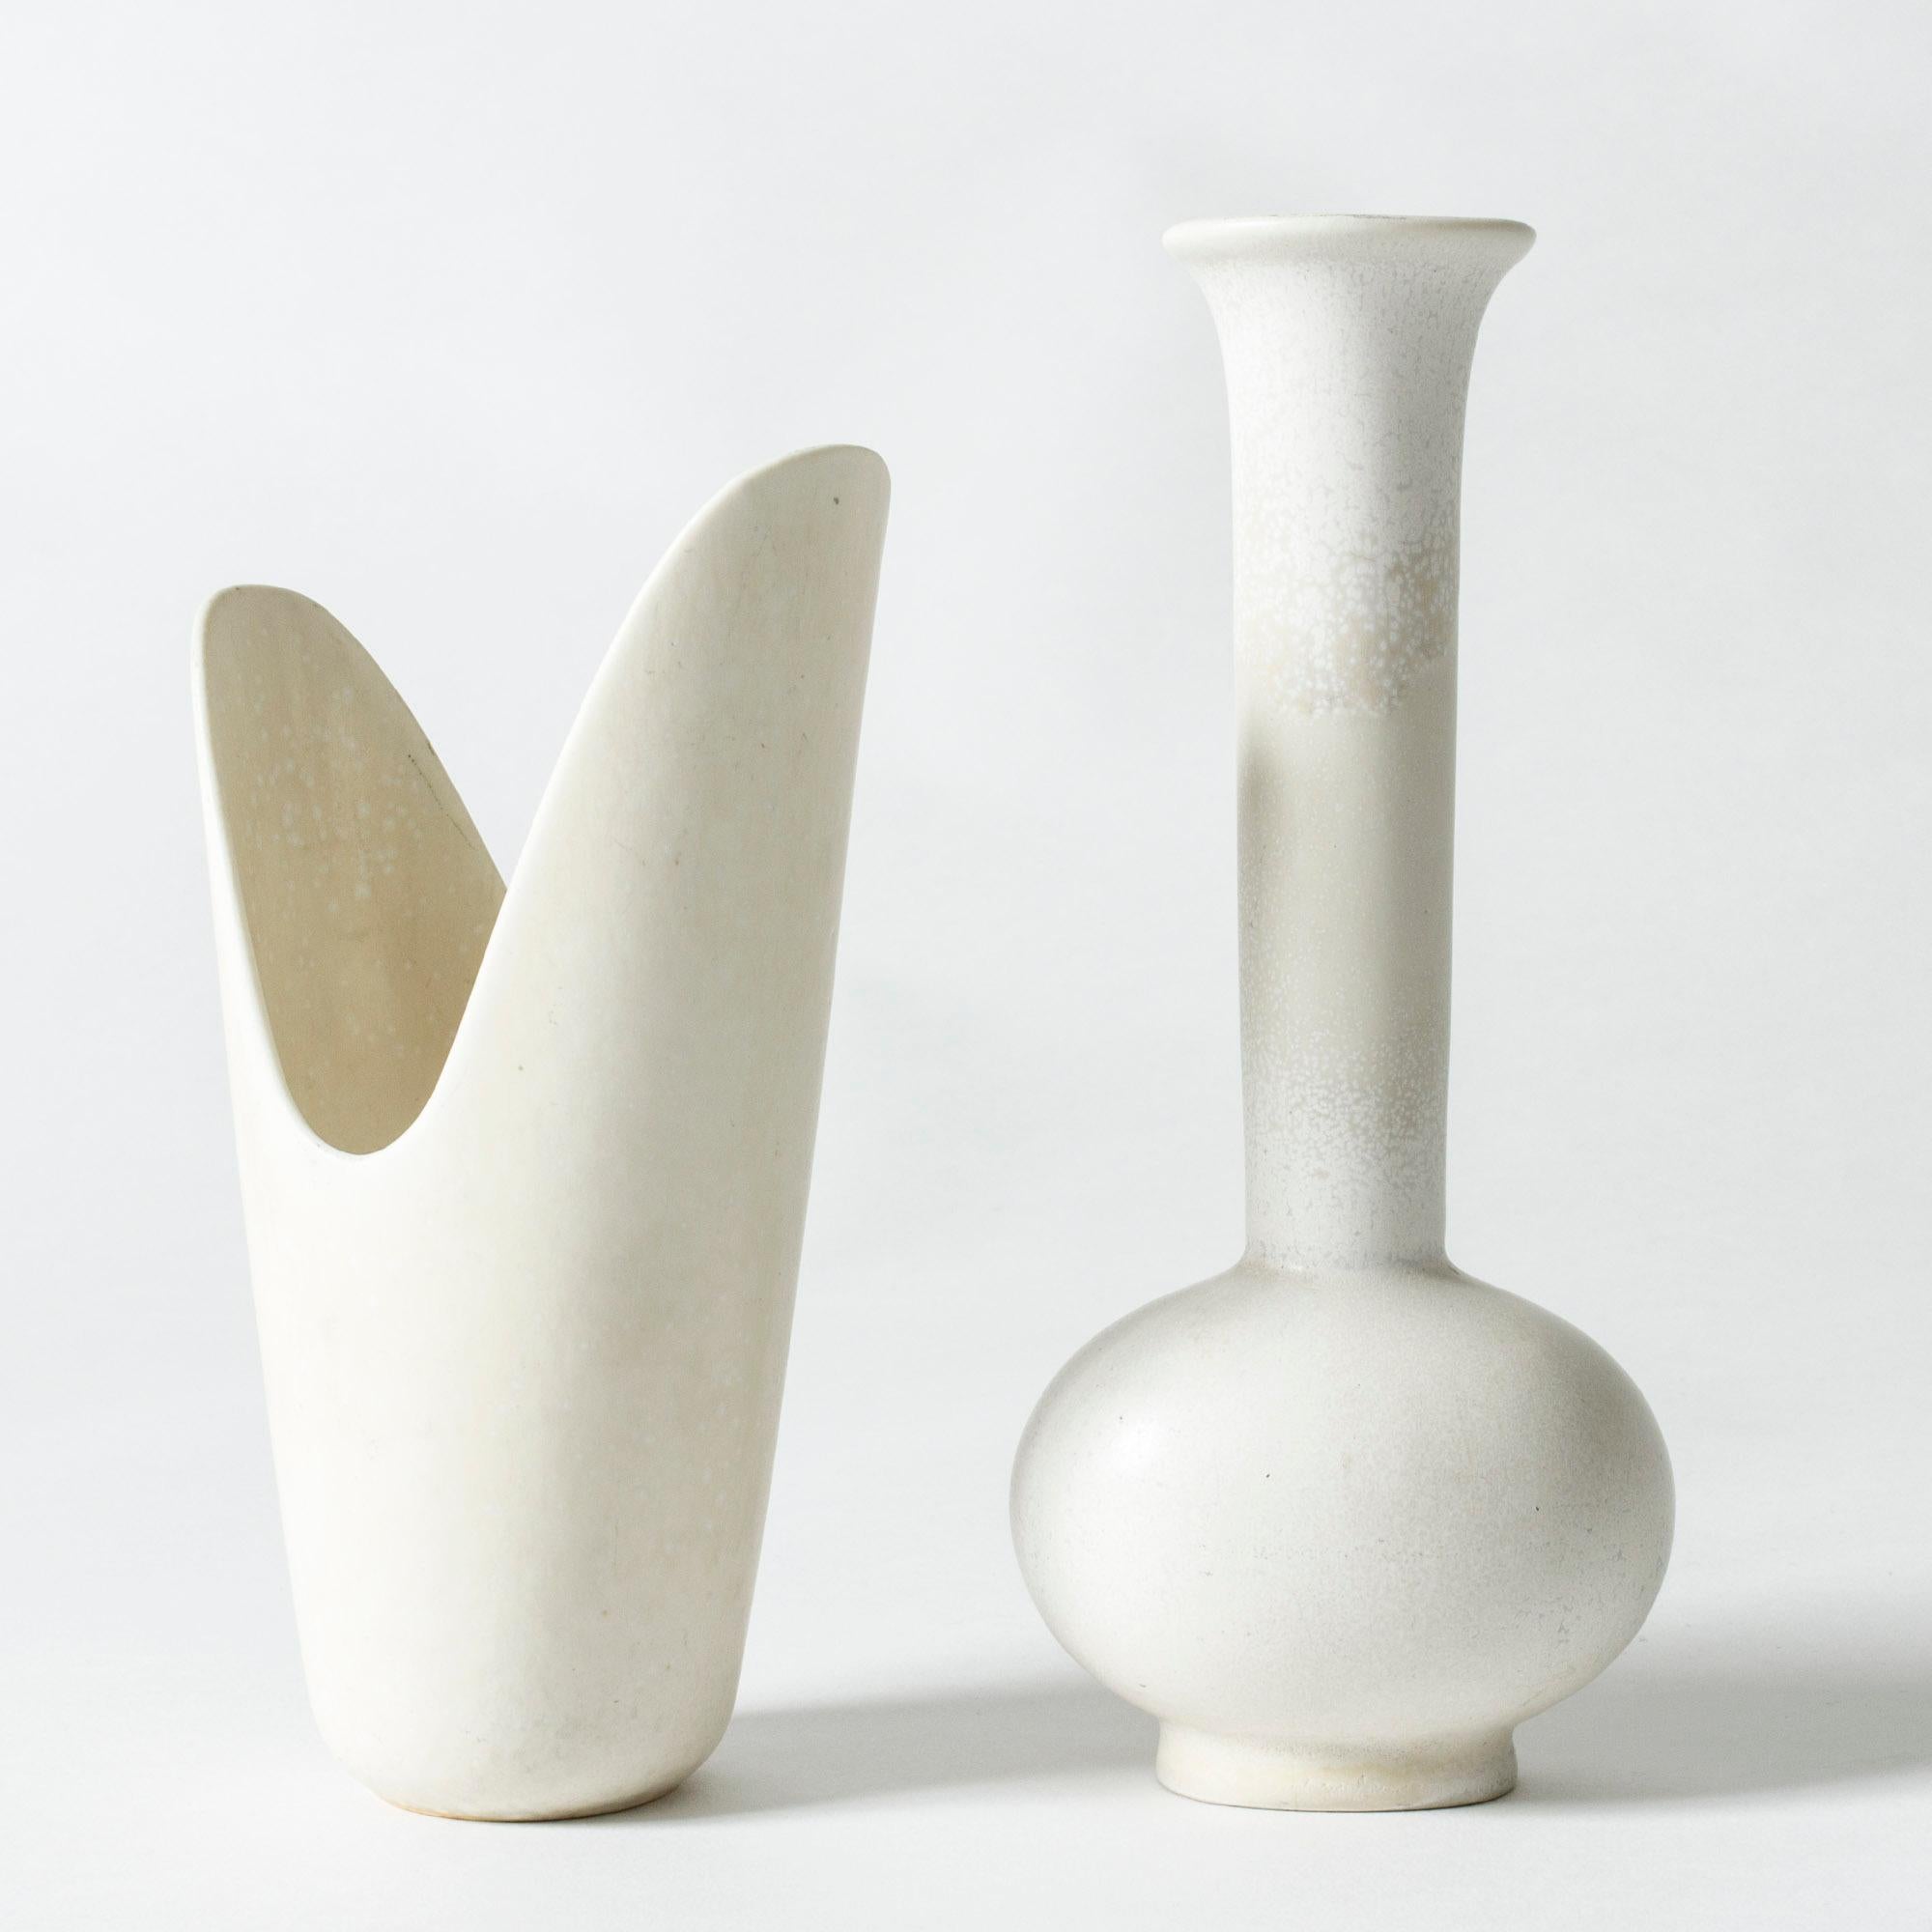 Set of two lovely stoneware vases by Gunnar Nylund, both with eggshell white glaze with “Mimosa” pattern. Beautiful, curved forms.

Size: Height 21 / 18 cm, Width 10 / 11 cm, Depth 6.5 / 6.5 cm.